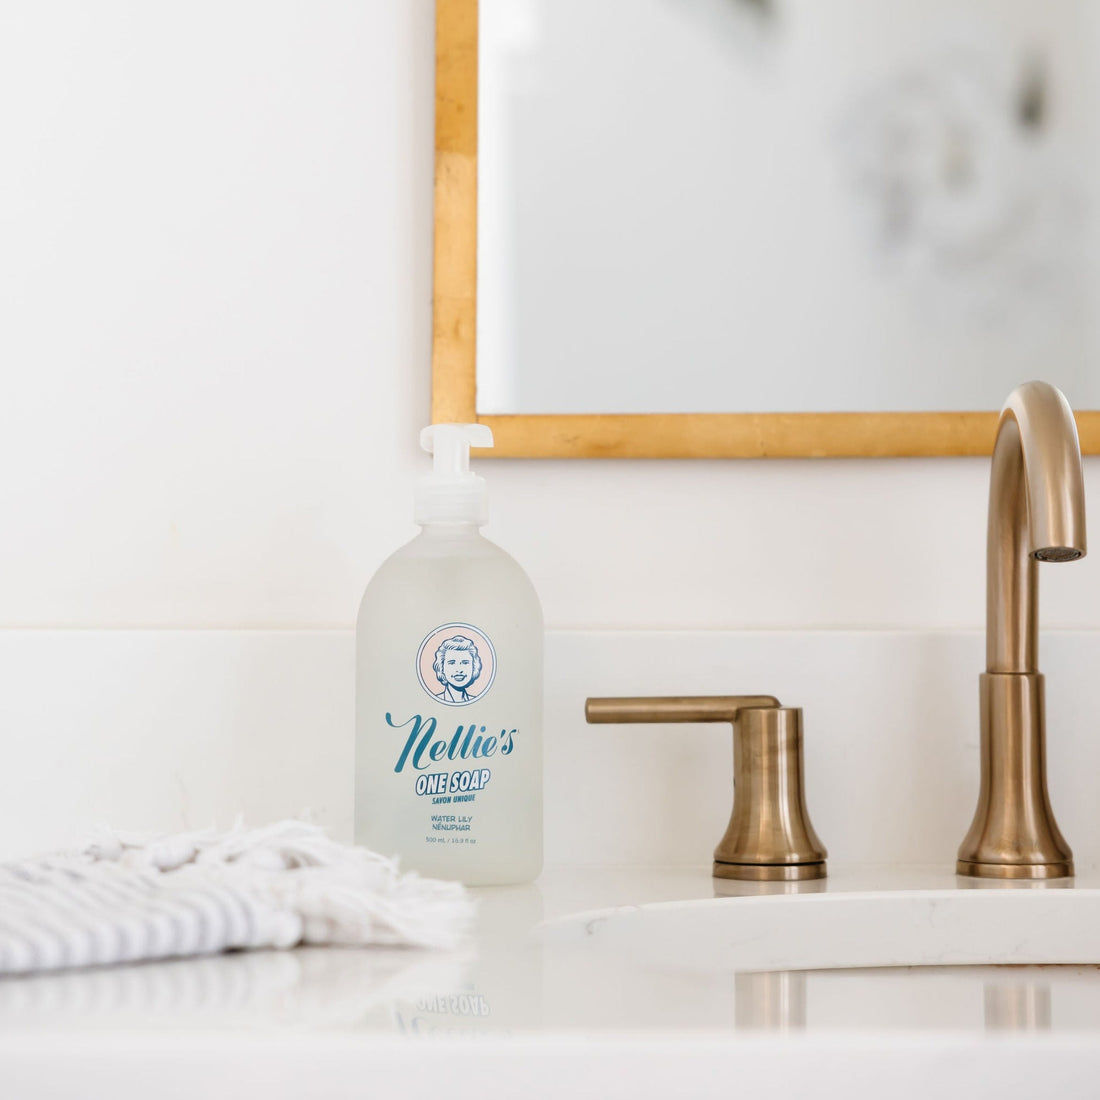 Nellie's glass multi-use One Soap glass bottle with pump on Bathroom counter by sink